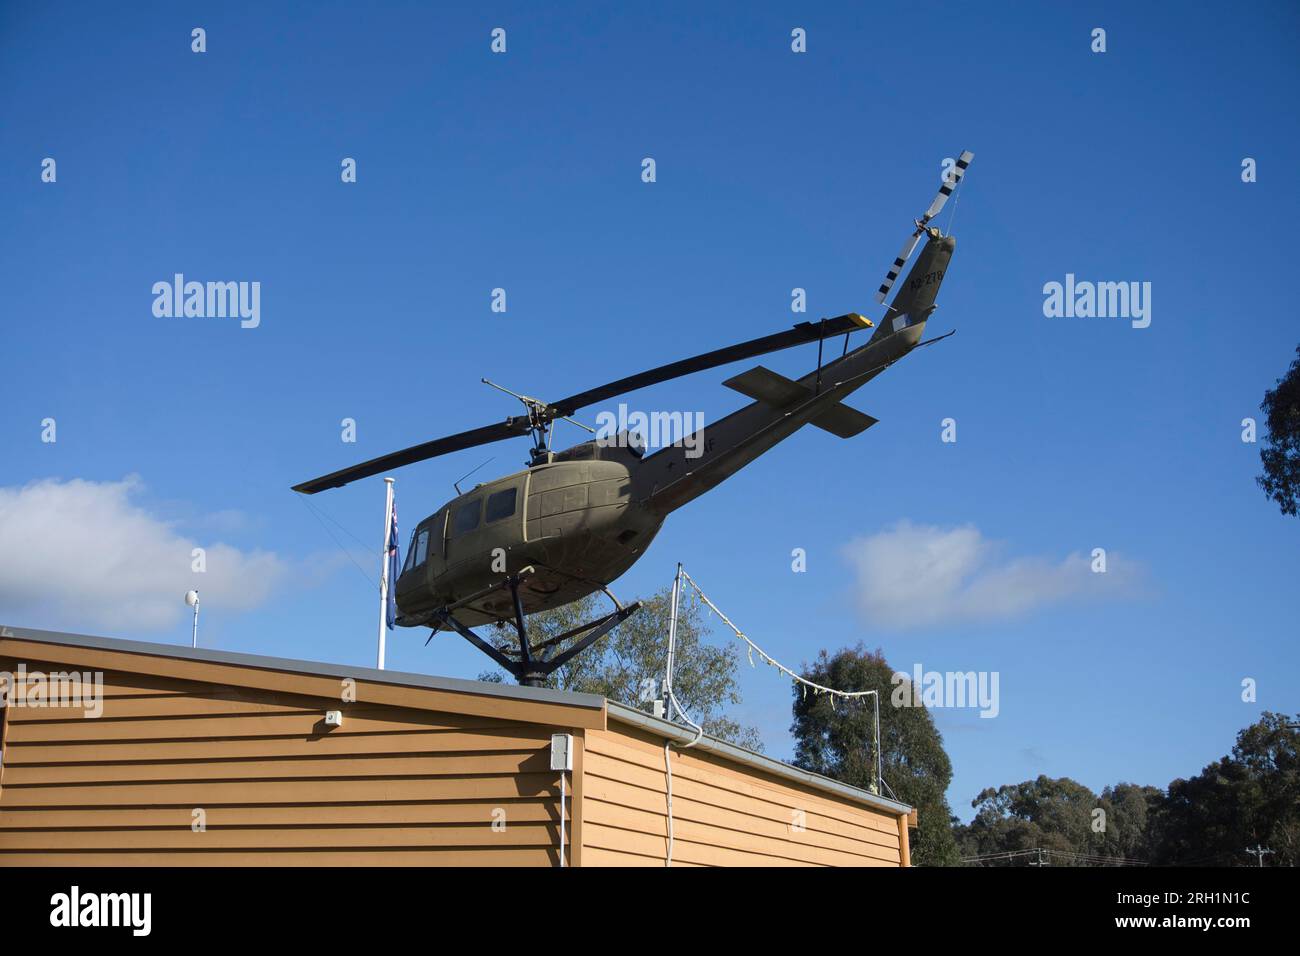 A side view of Bell UH-1 Iroquois a helicopter used in the Viet Nam War at Seymour Viet Nam War Memorial Stock Photo